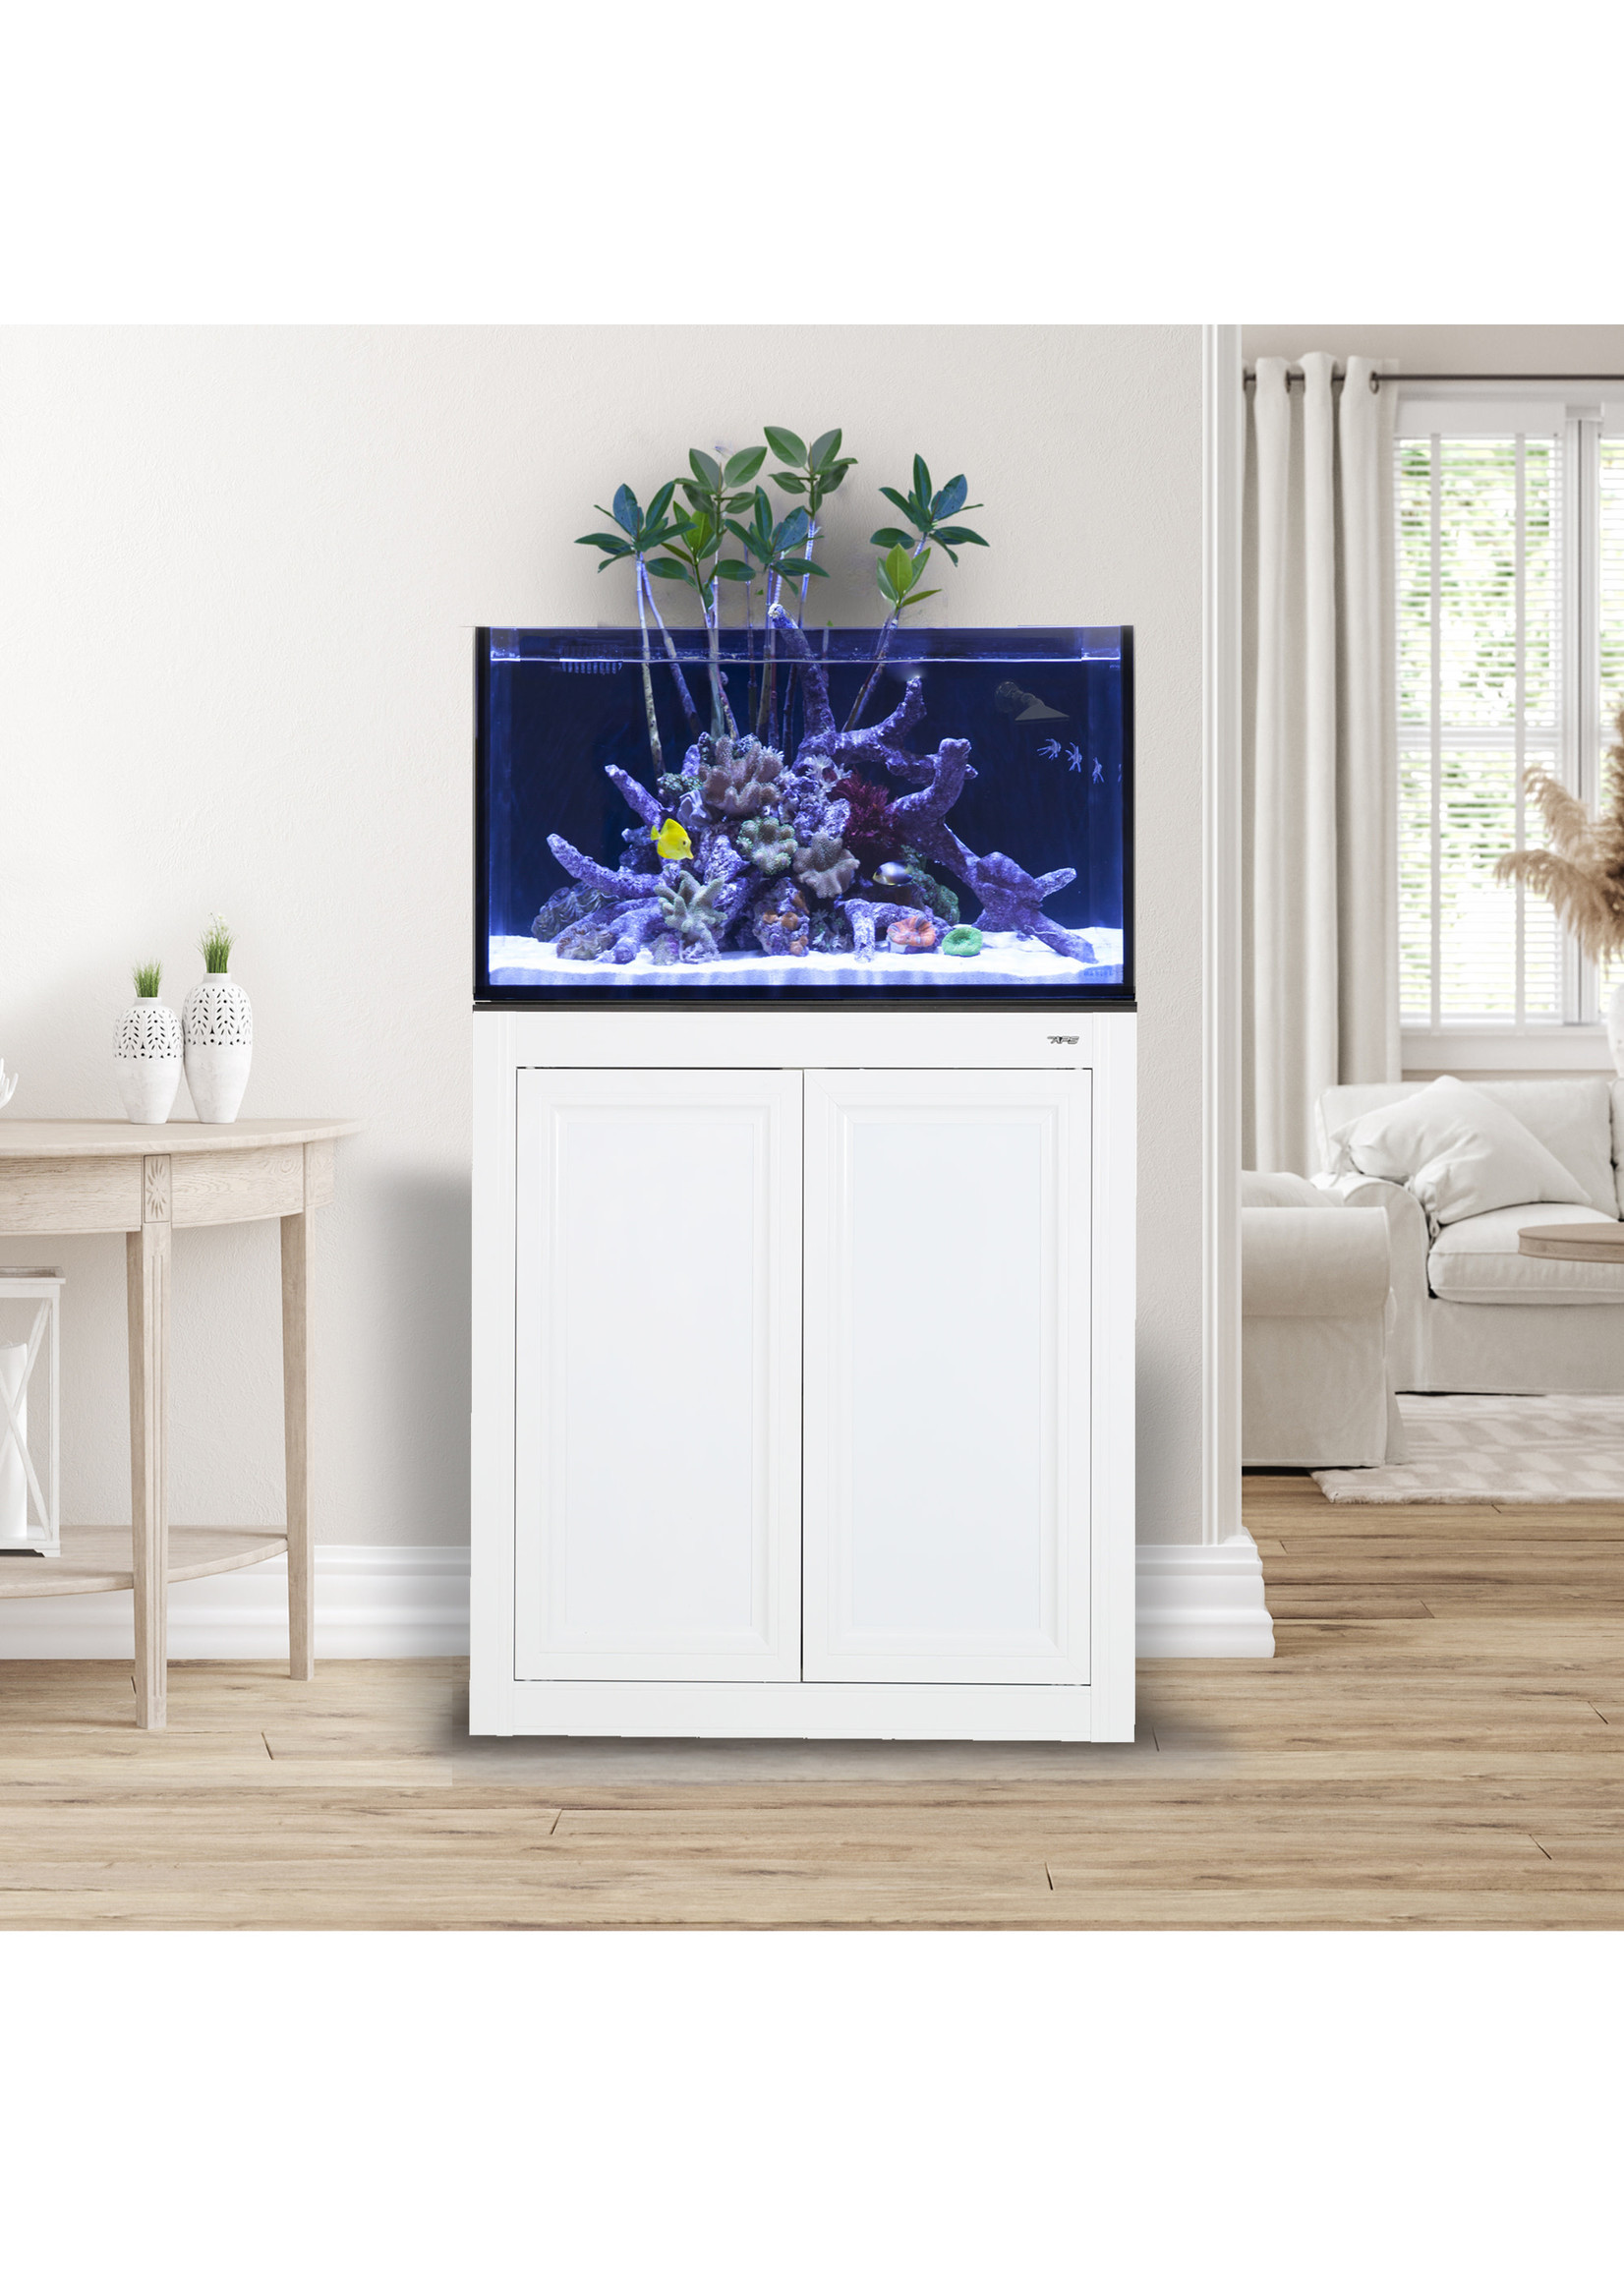 Innovative Marine EXT 50 GALLON COMPLETE REEF SYSTEM WHITE